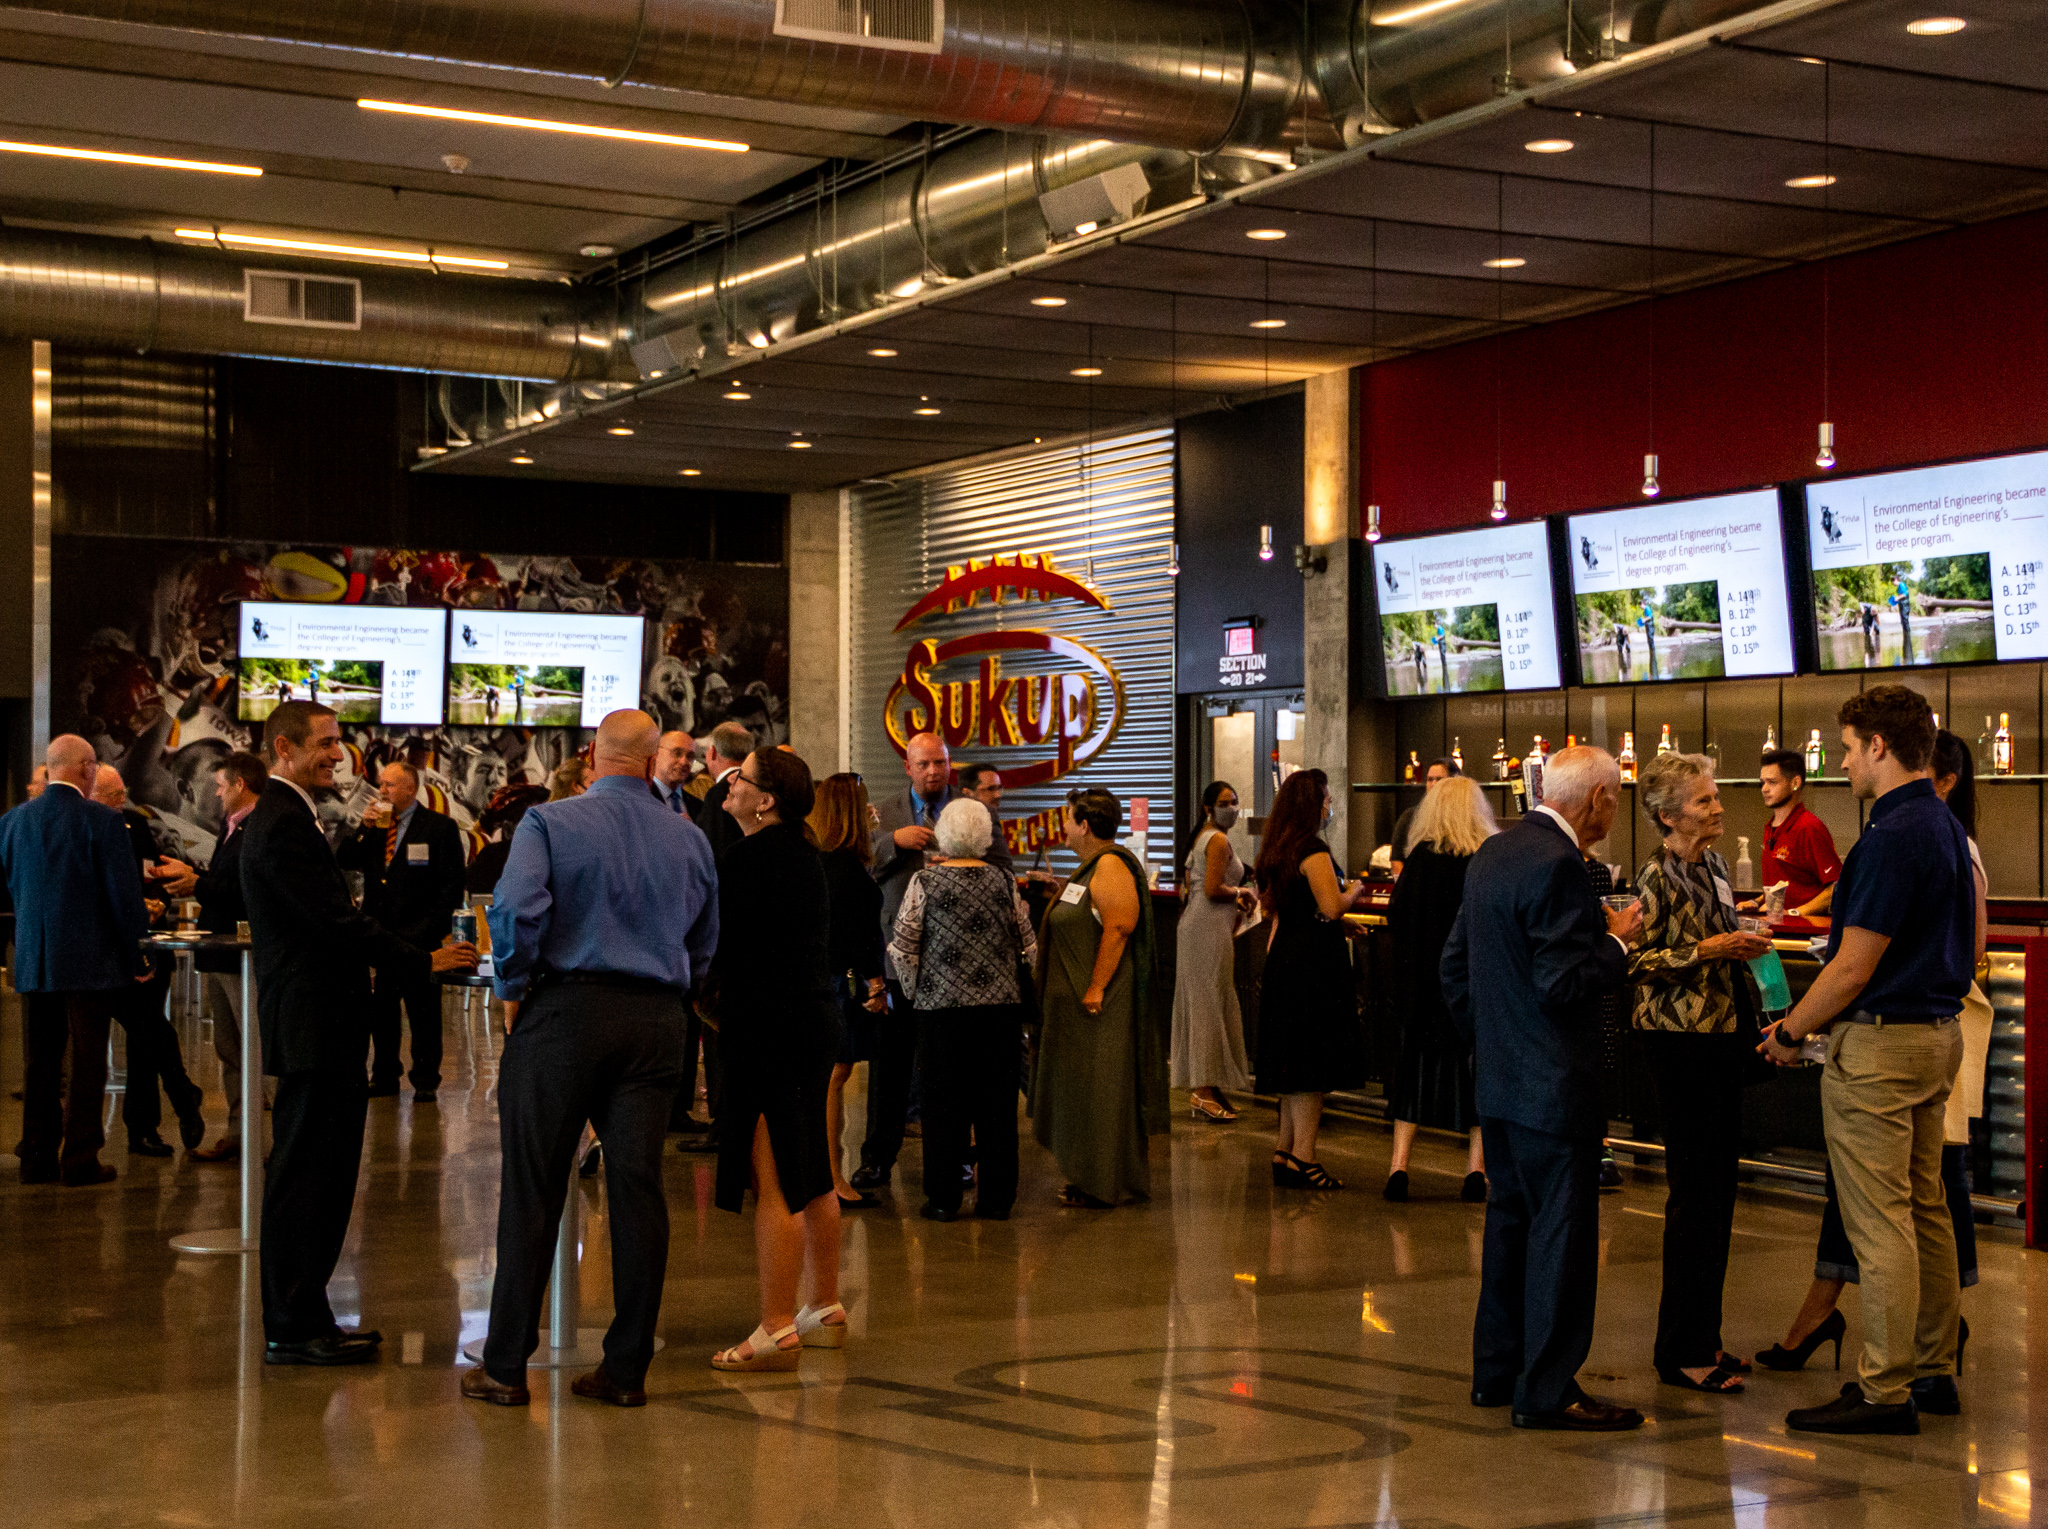 Attendees enjoy drinks and listen to jazz music at the Sukup Endzone Club.